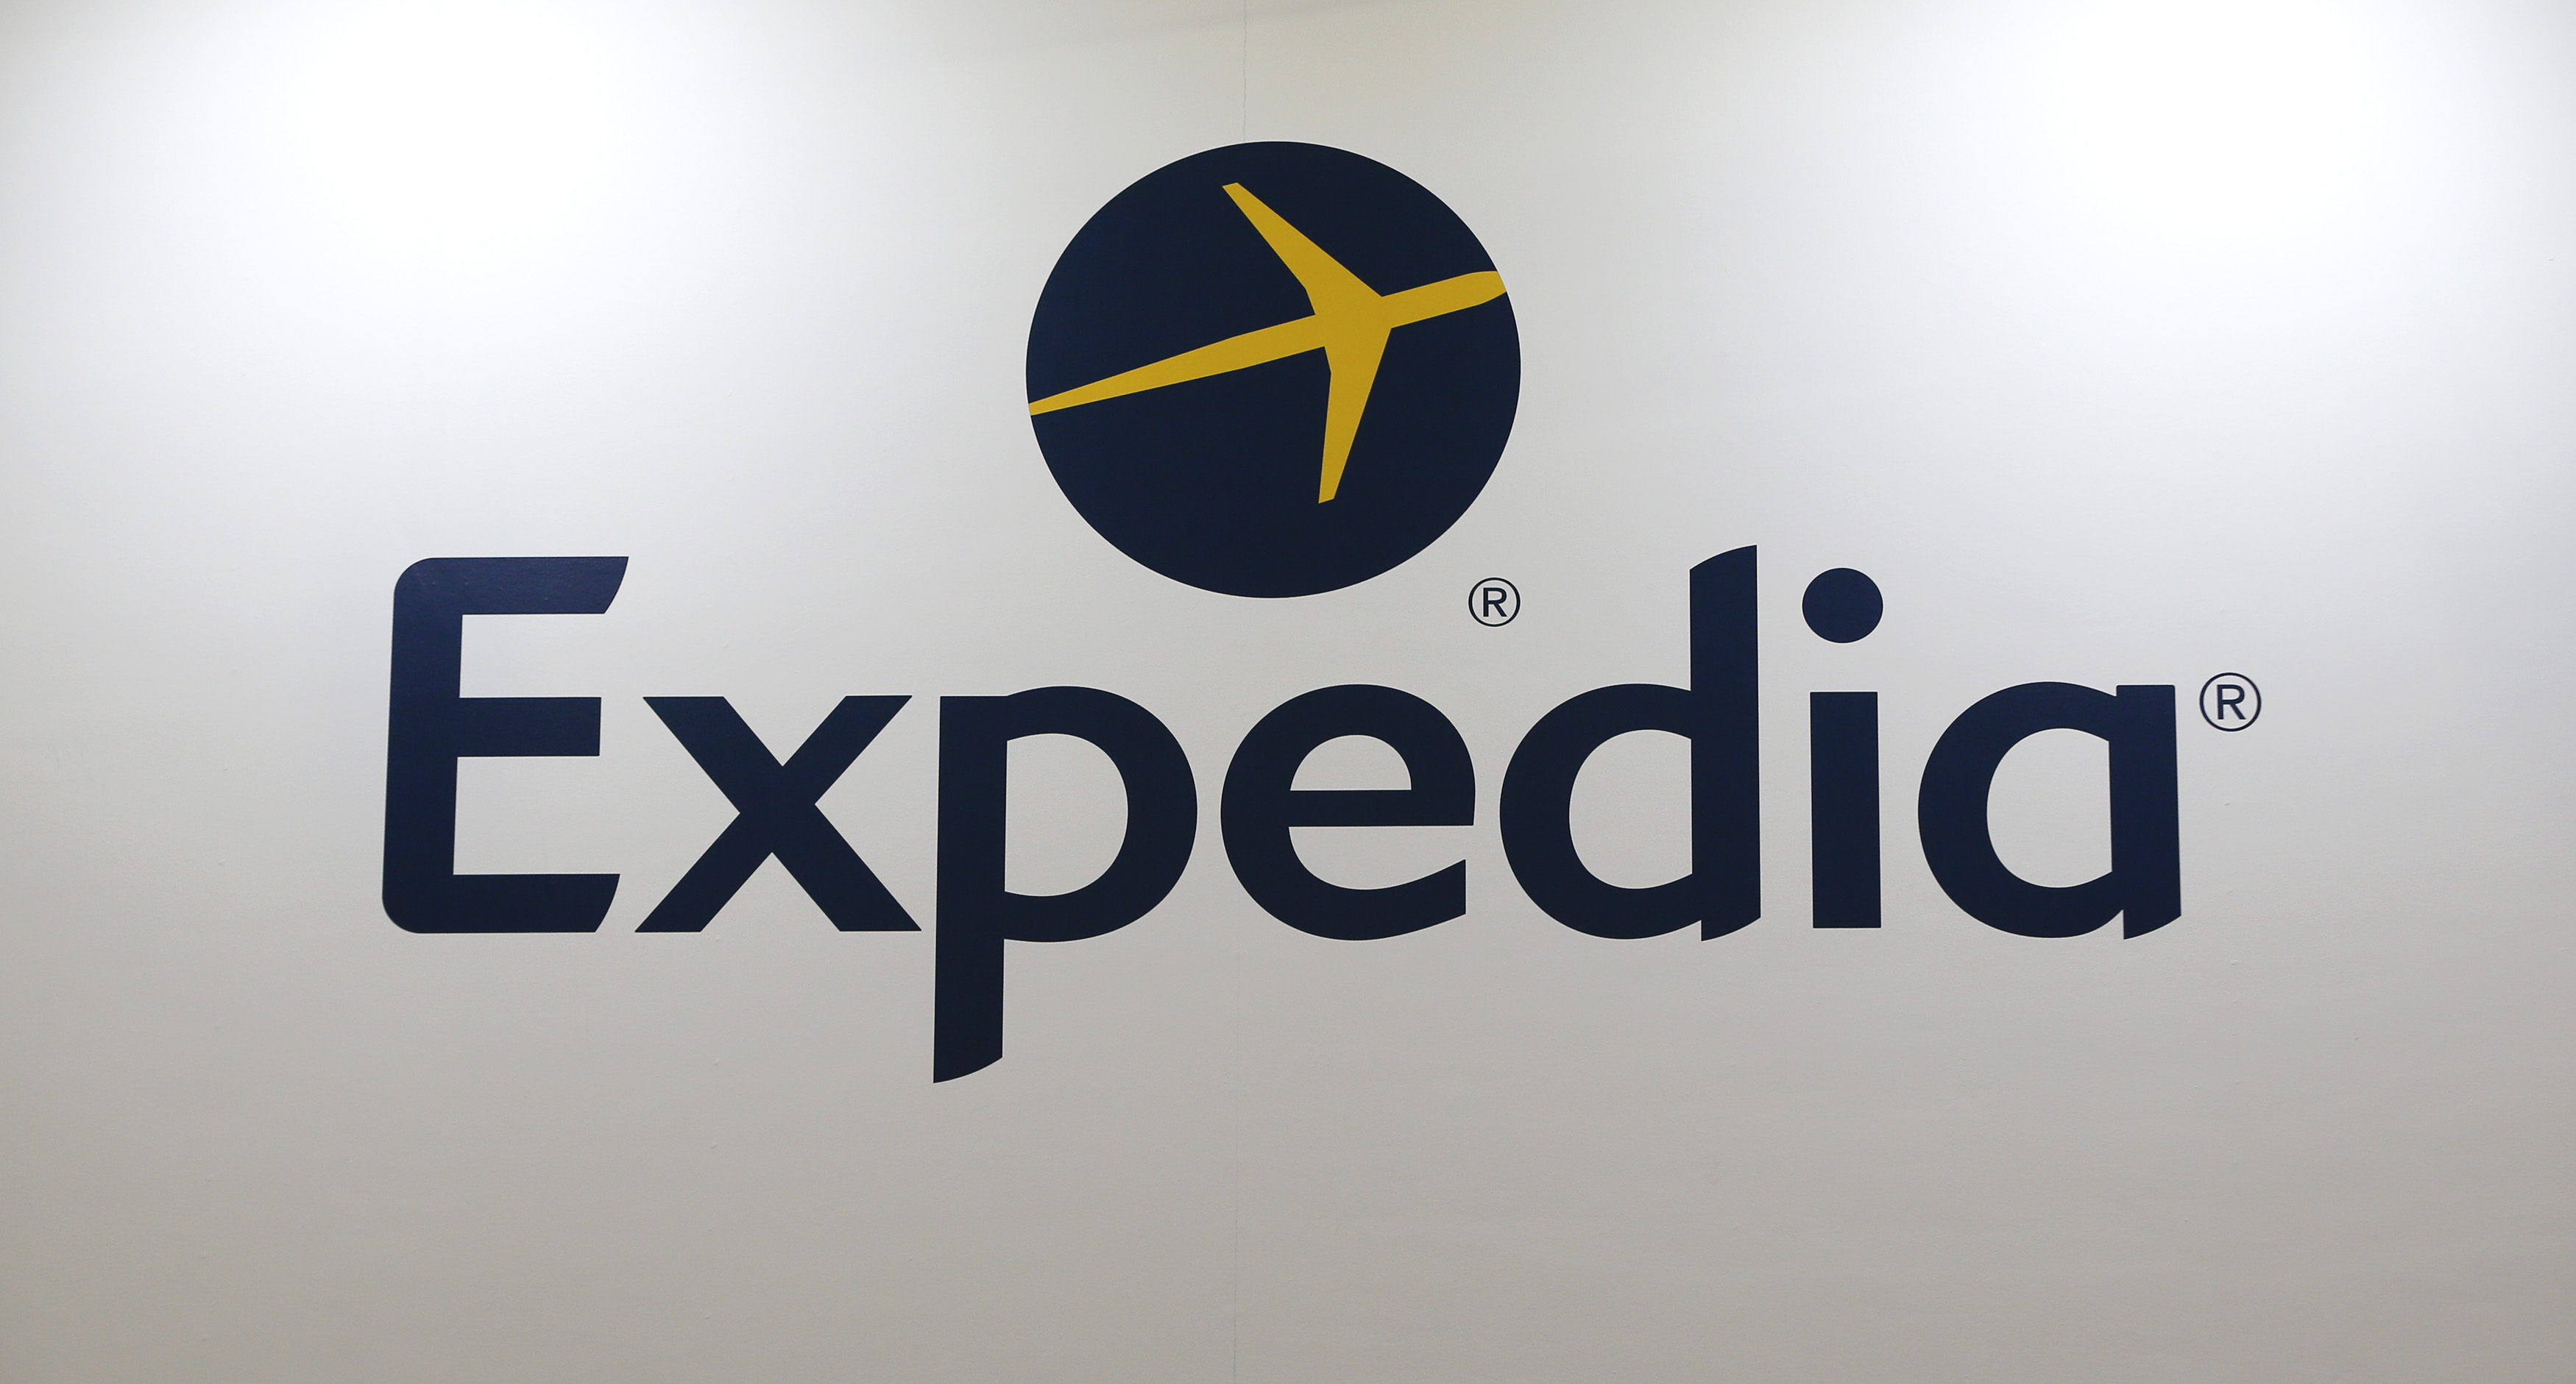 The logo of global online travel brand Expedia is pictured at the International Tourism Trade Fair in Berlin